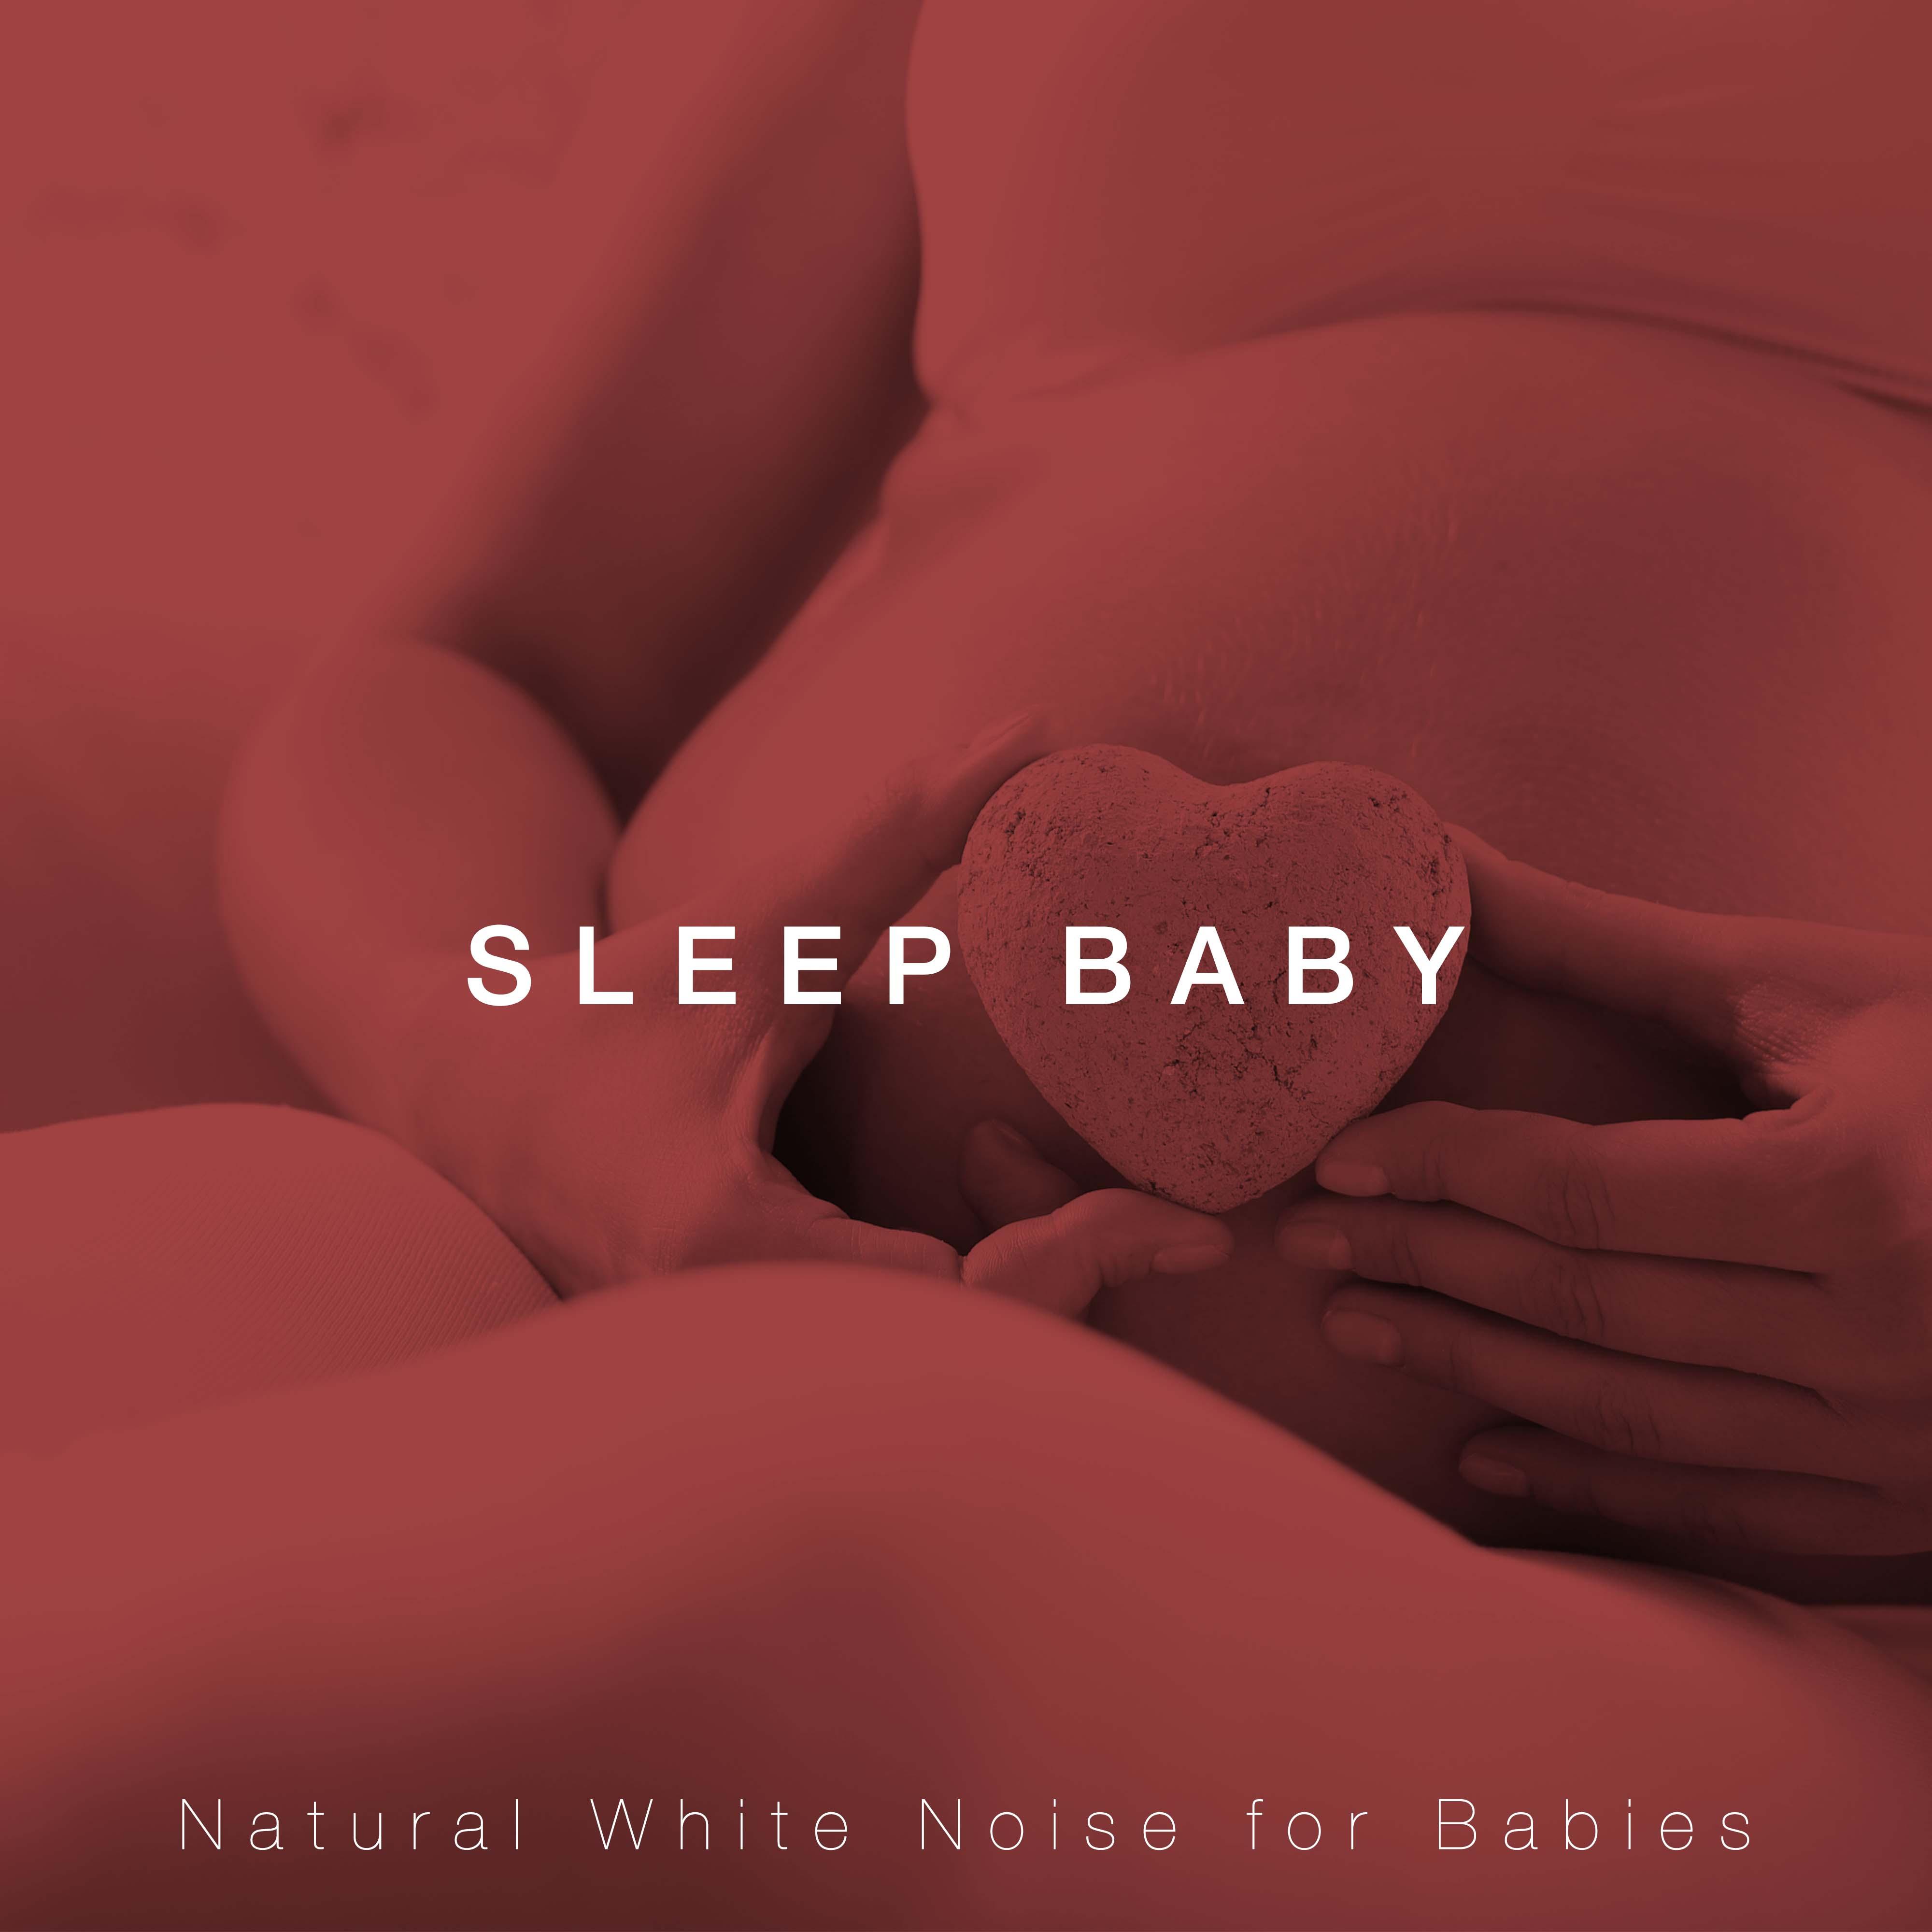 Sleep Baby - Natural White Noise for Babies, Relaxing Music to Soothe Children, Toddlers and Newborns